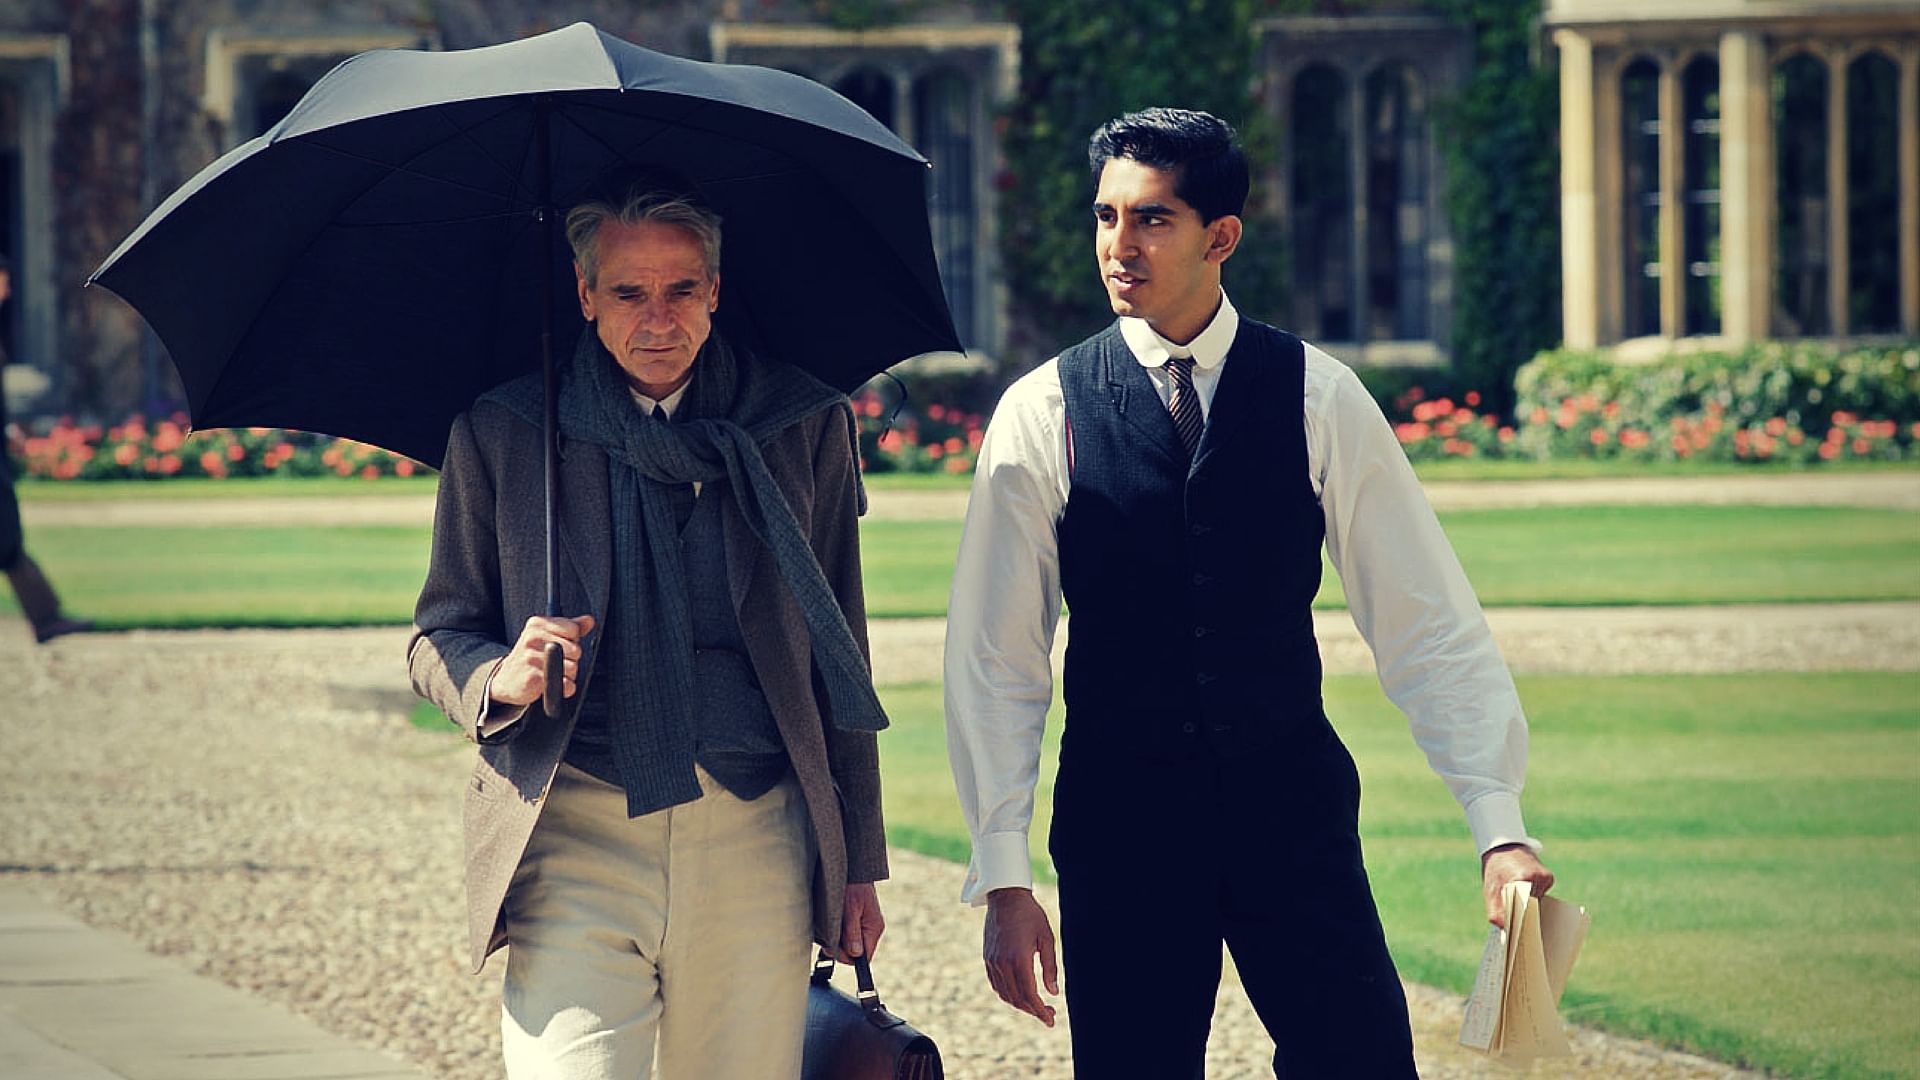 Jeremy Irons and Dev Patel in a scene from <i>The Man Who Knew Infinity </i>(Photo: Twitter/<a href="https://twitter.com/DavidTusing">@DavidTusing</a>)